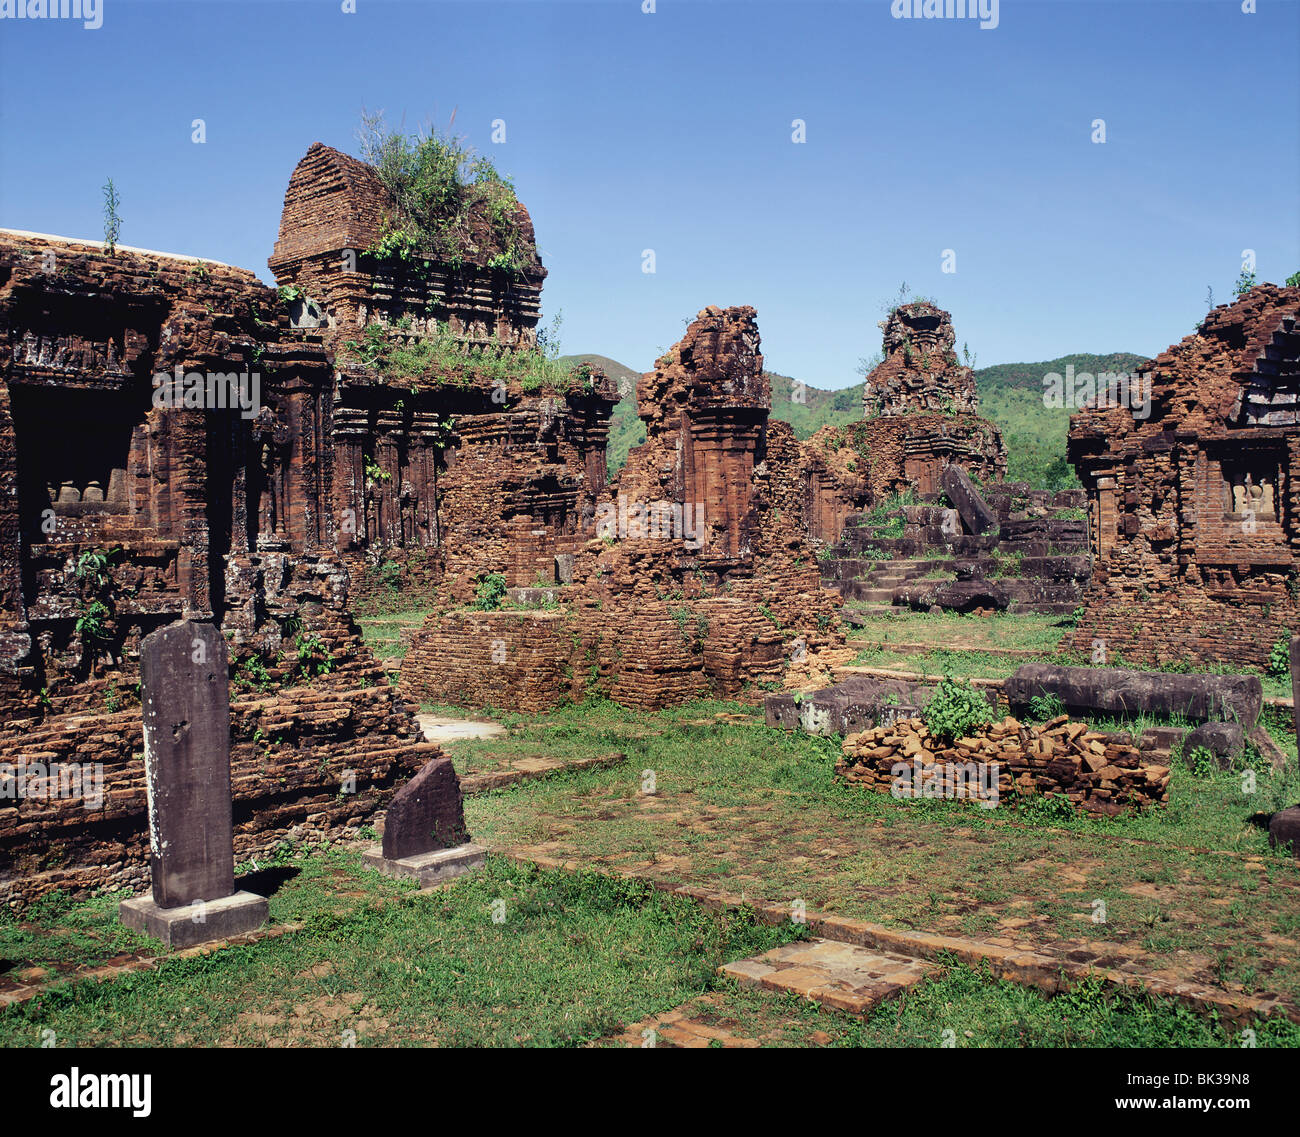 Ruins of the Cham sanctuary of My Son, dating from the 7th to 10th centuries. Vietnam, Indochina, Southeast Asia, Asia Stock Photo